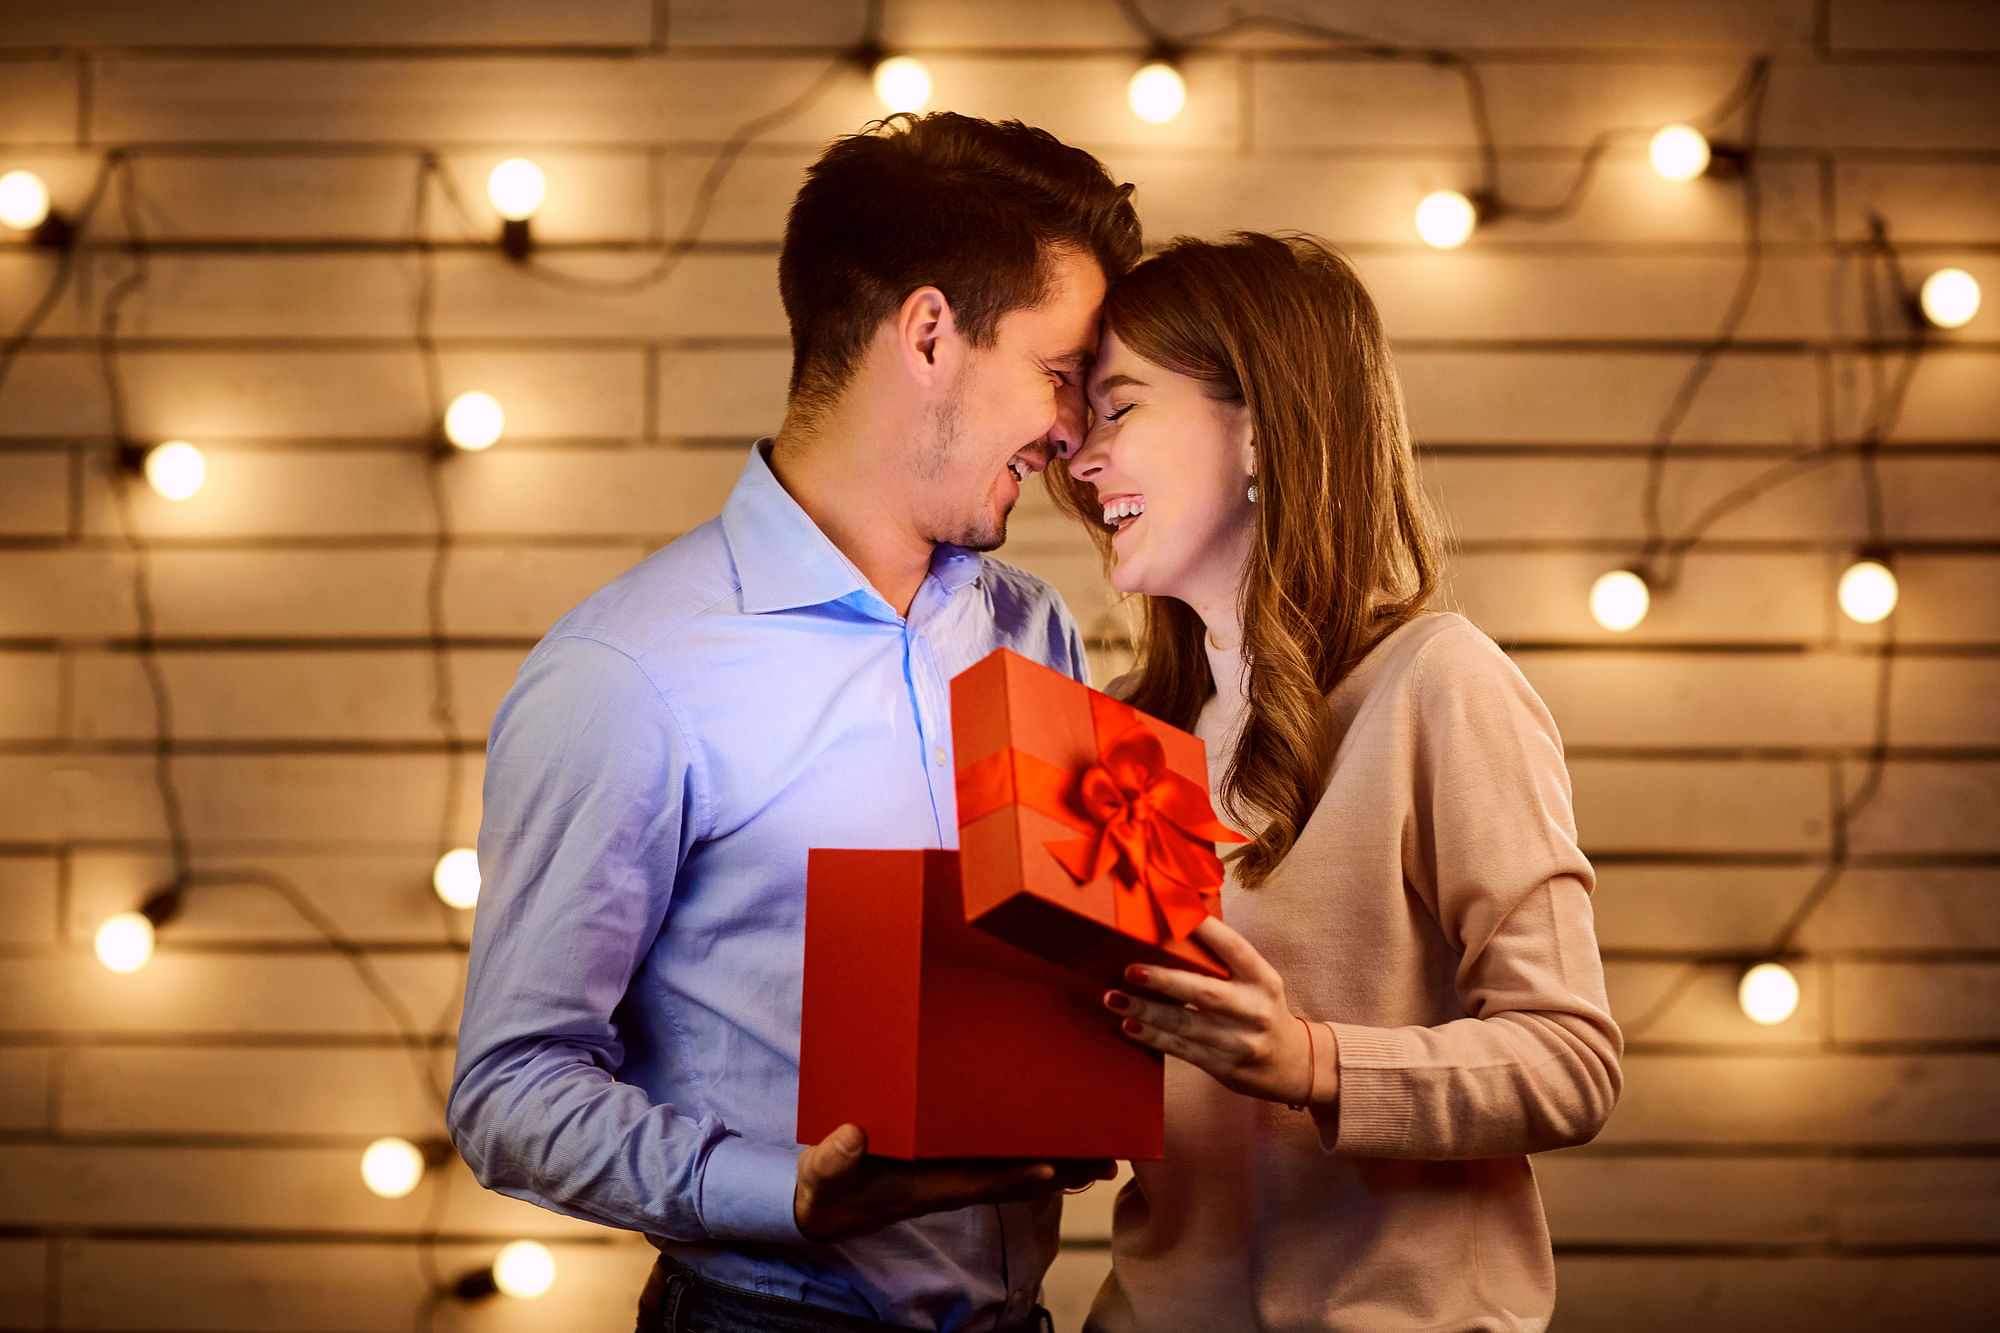 Happy Valentine's Day 2023: Top 50 Wishes, Messages and Quotes to share  with your partner, family and loved ones - Times of India